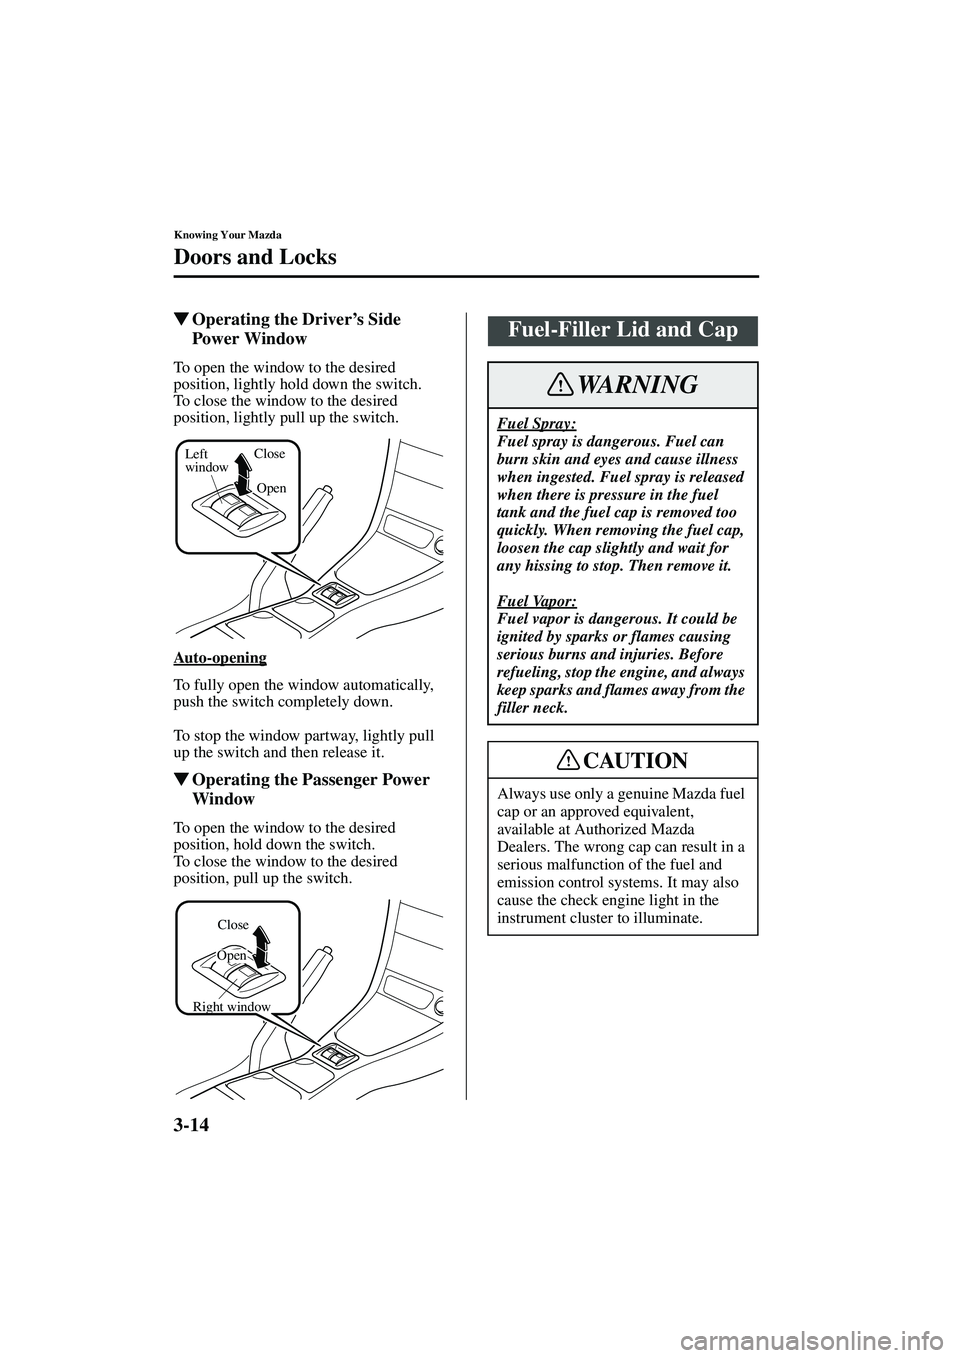 MAZDA MODEL MX-5 MIATA 2003  Owners Manual 3-14
Knowing Your Mazda
Doors and Locks
Form No. 8R09-EA-02G
Operating the Driver’s Side 
Power Window
To open the window to the desired 
position, lightly hold down the switch.
To close the window